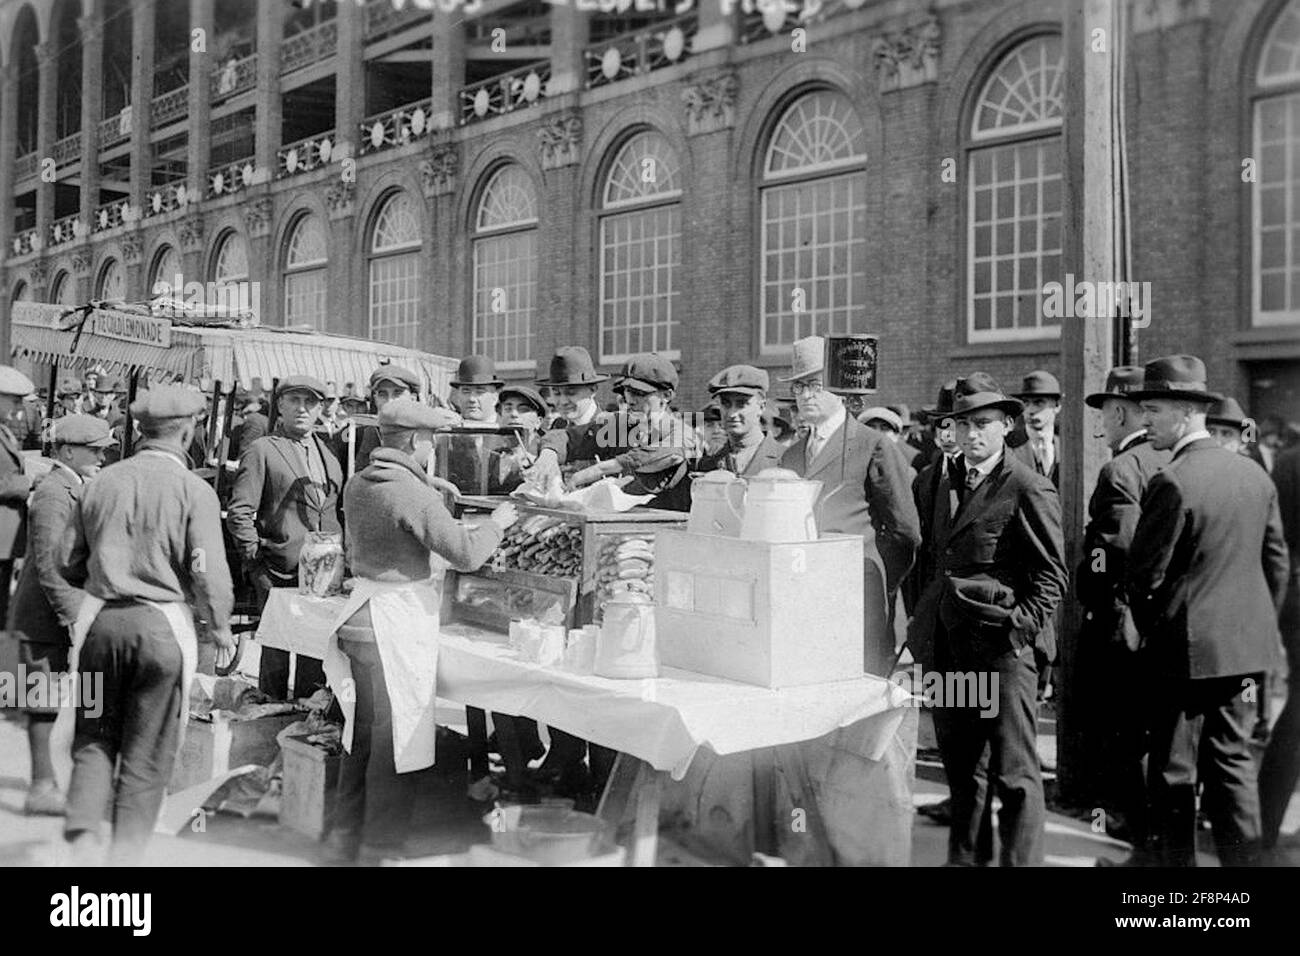 Baseball fans buying hot dogs while waiting for gates to open at Ebbets Field, New York, October 6, 1920. Stock Photo